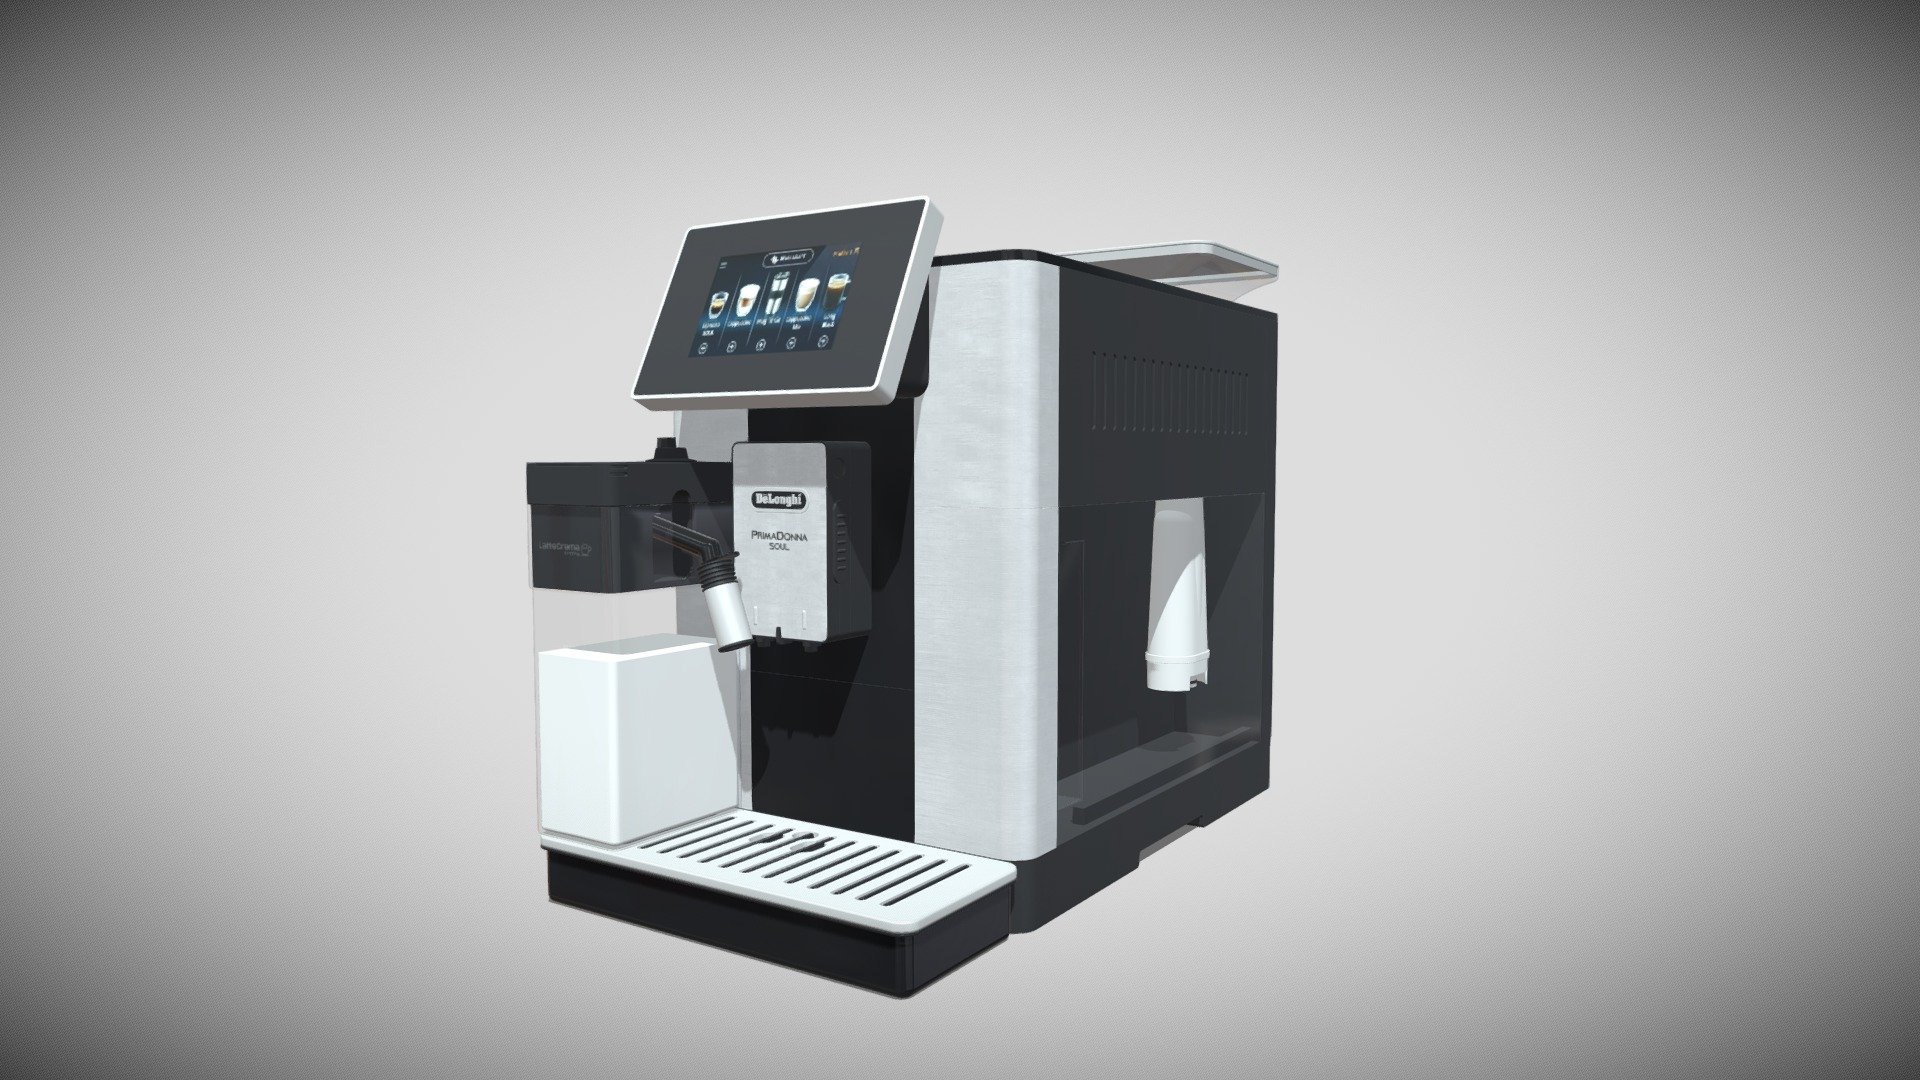 Detailed model of a De Longhi Primadonna Soul Coffee Maker, modeled in Cinema 4D.The model was created using approximate real world dimensions.

The model has 75,292 polys and 72,181 vertices.

An additional file has been provided containing the original Cinema 4D project files with both standard and v-ray materials, textures and other 3d export files such as 3ds, fbx and obj 3d model